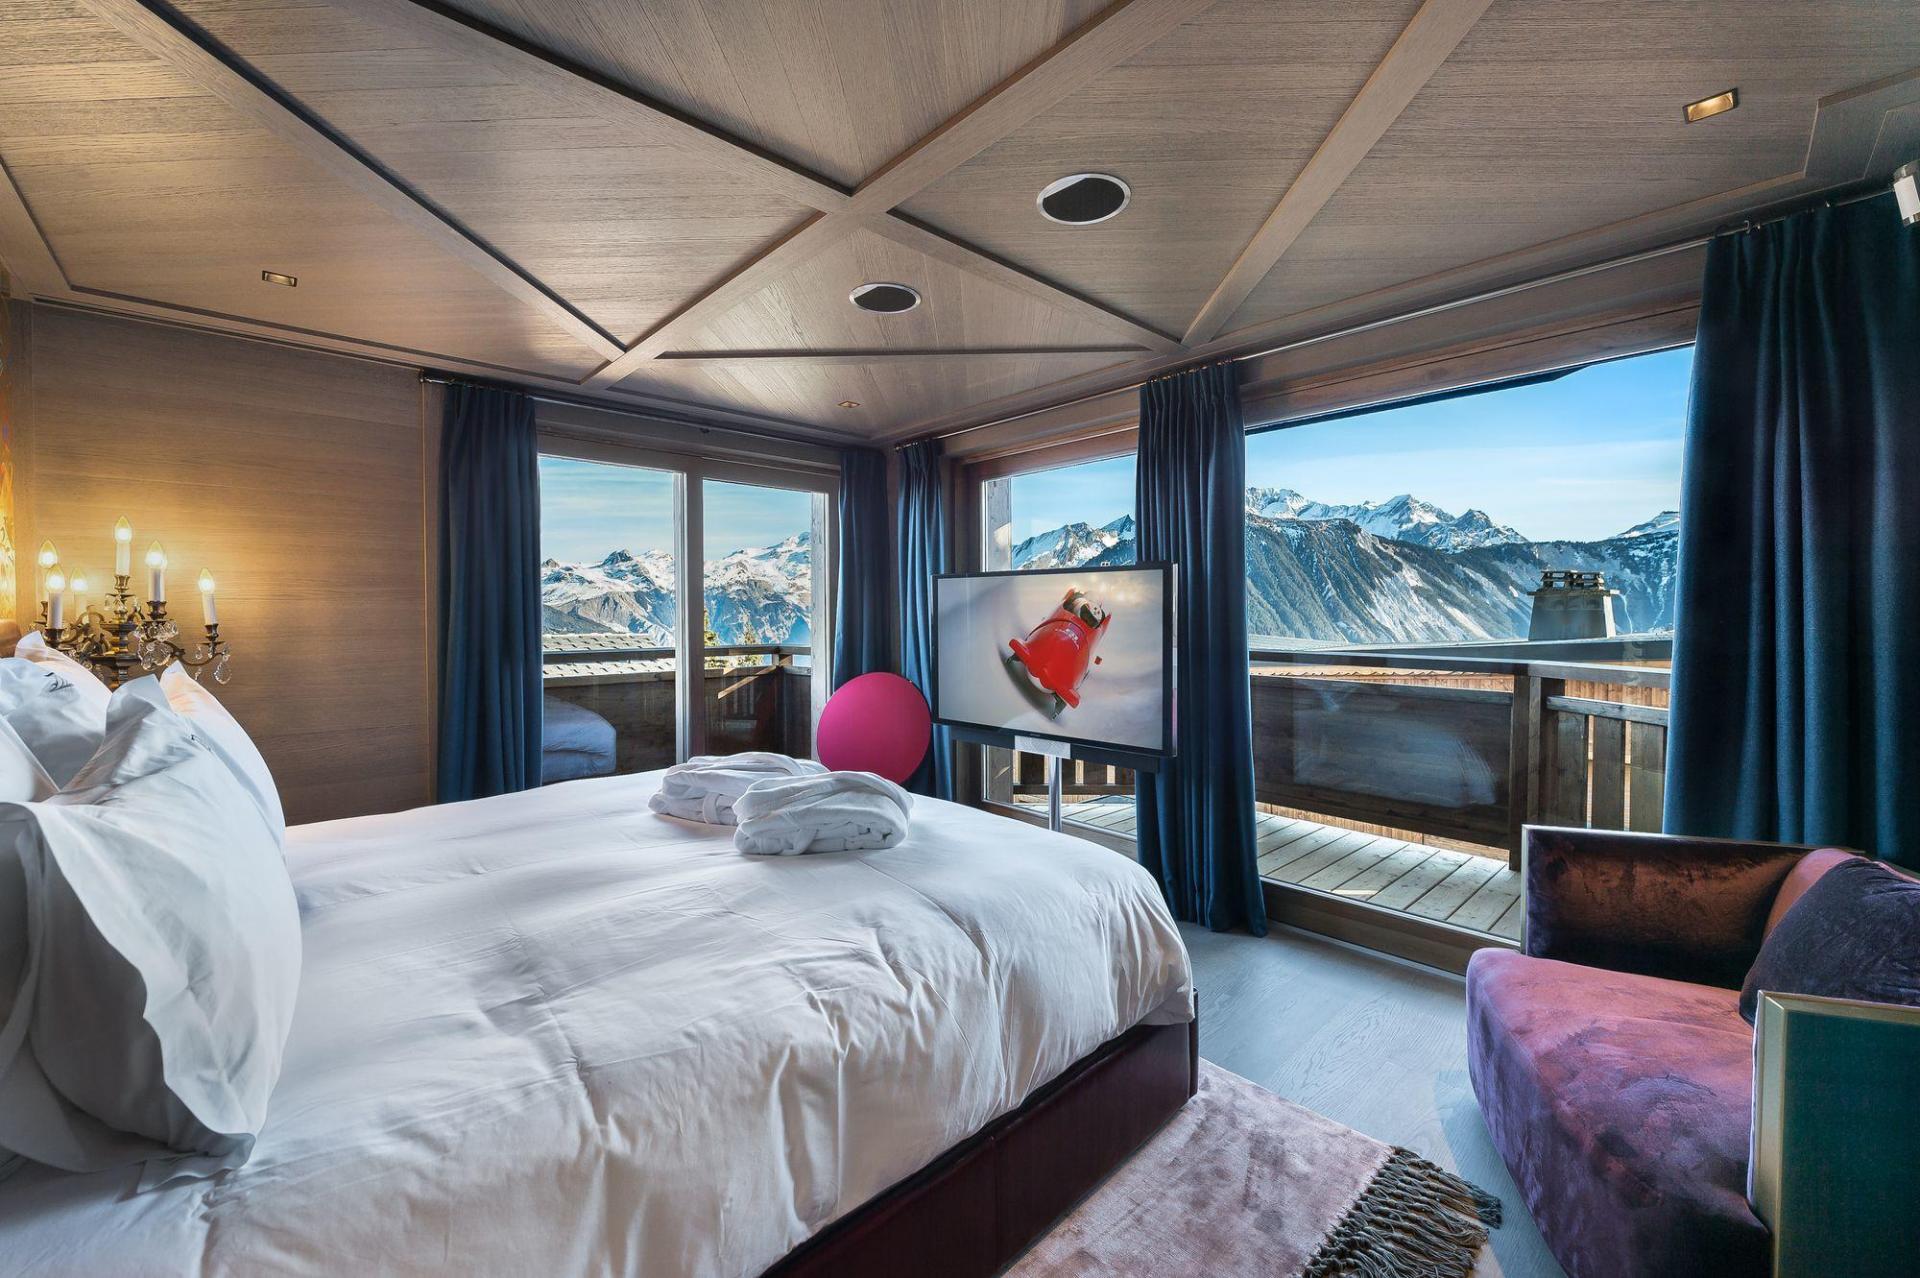 ONE OF THE BEDROOM IN CHALET LE PALACE WITH ITS STUNNING VIEWS